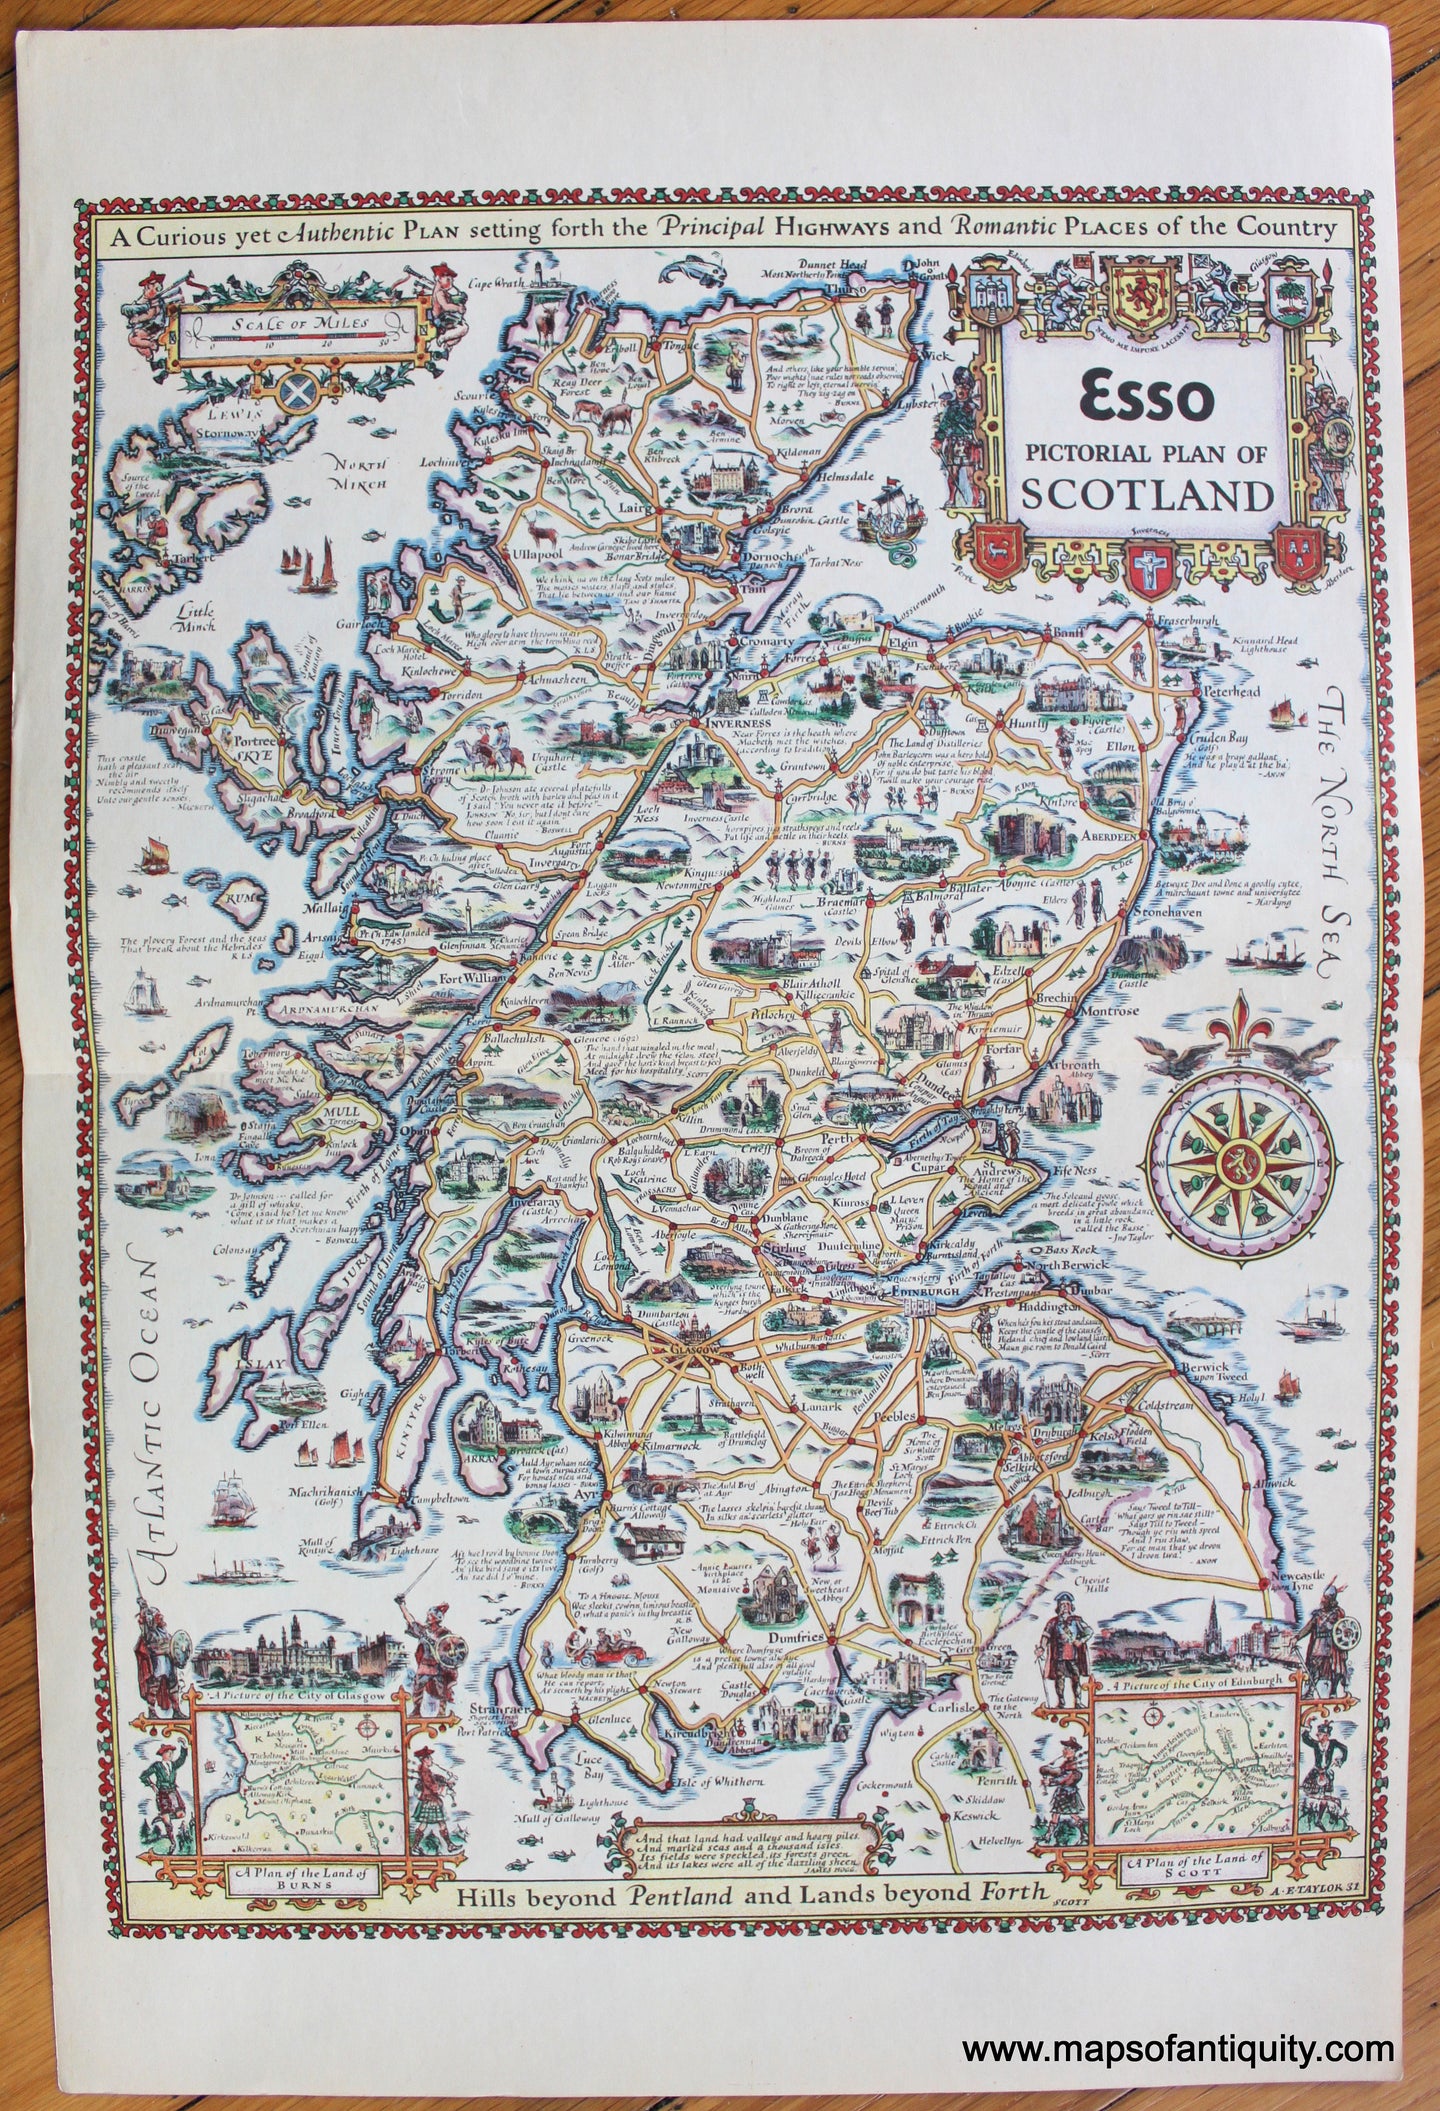 Antique-Printed-Color-Pictorial-Map-Esso-Pictorial-Plan-of-Scotland-1933-A.E.-Taylor-Ireland-1900s-20th-century-Maps-of-Antiquity